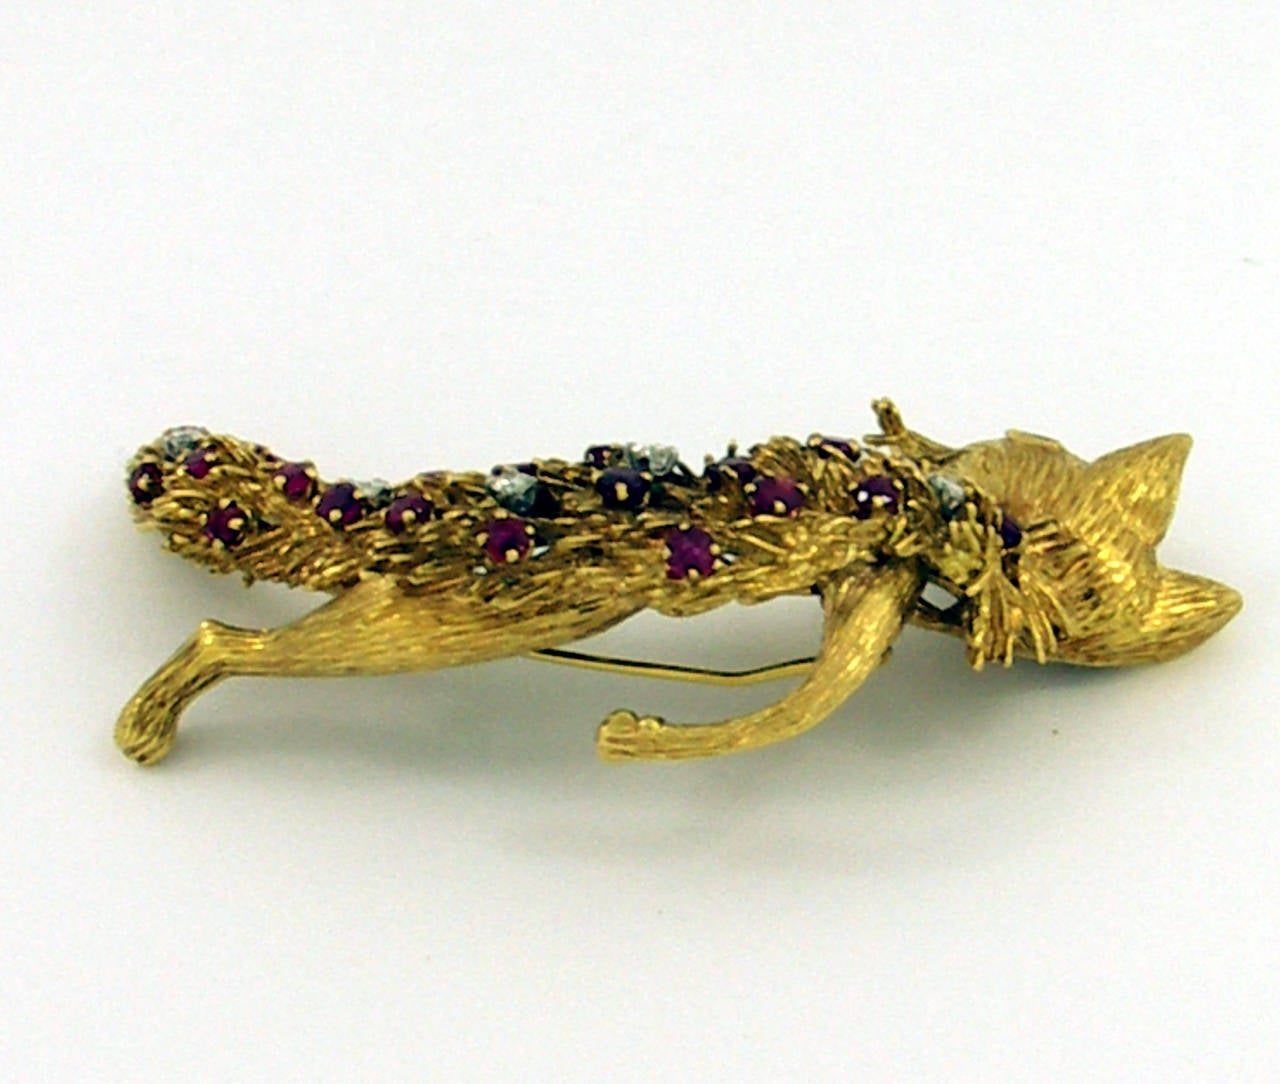 A fun fox in 18K yellow gold, set with approximately 1.5ct of round faceted rubies. There are also five round brilliant cut diamonds beautifully setting of the rubies, weighing approximately 0.33ct total weight. This sly creature measures three